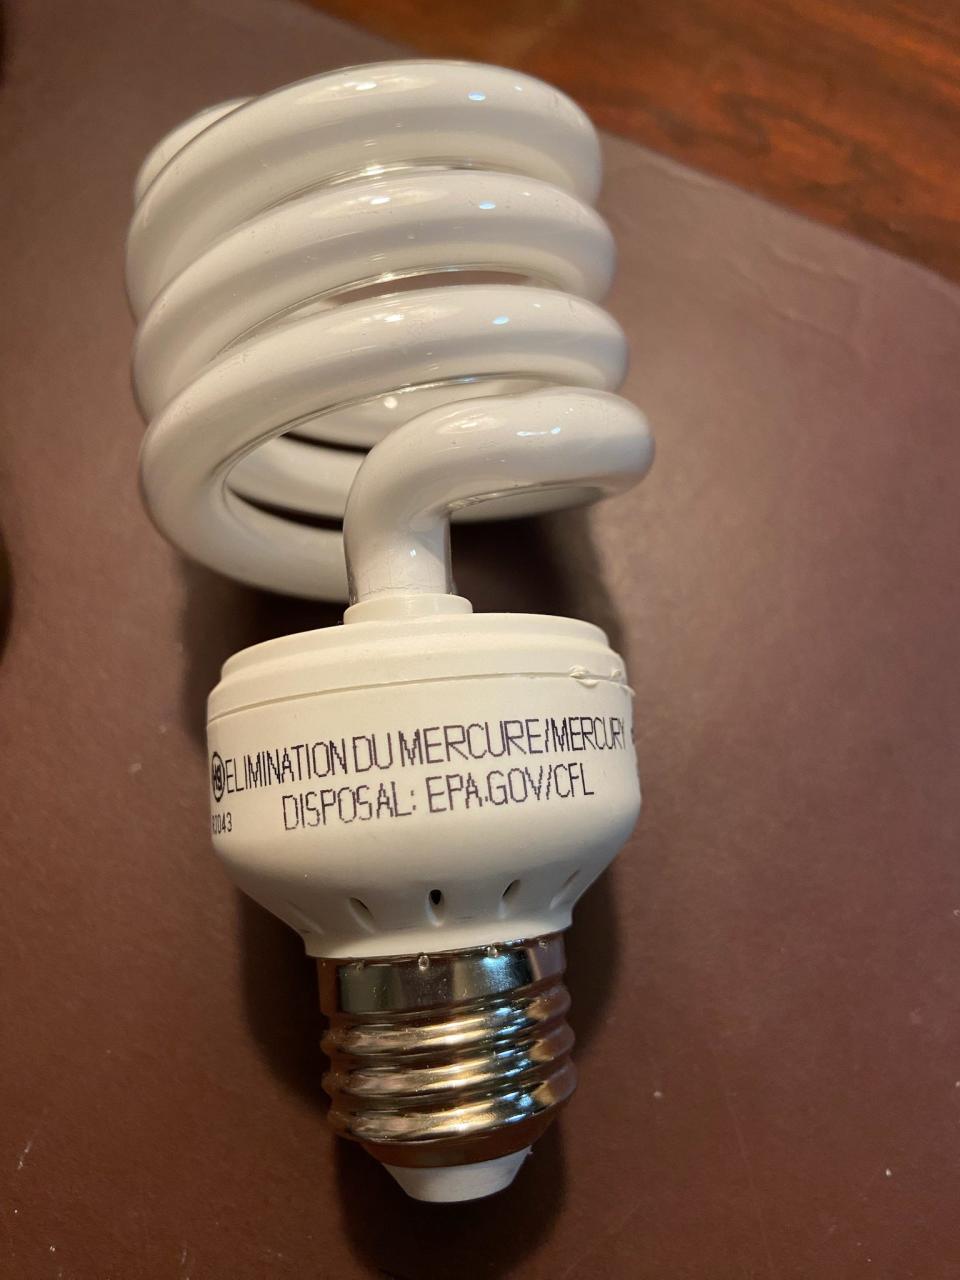 Recently an LED compact incandescent bulb like this one became the latest in a series of unfortunate mishaps for our columnist.